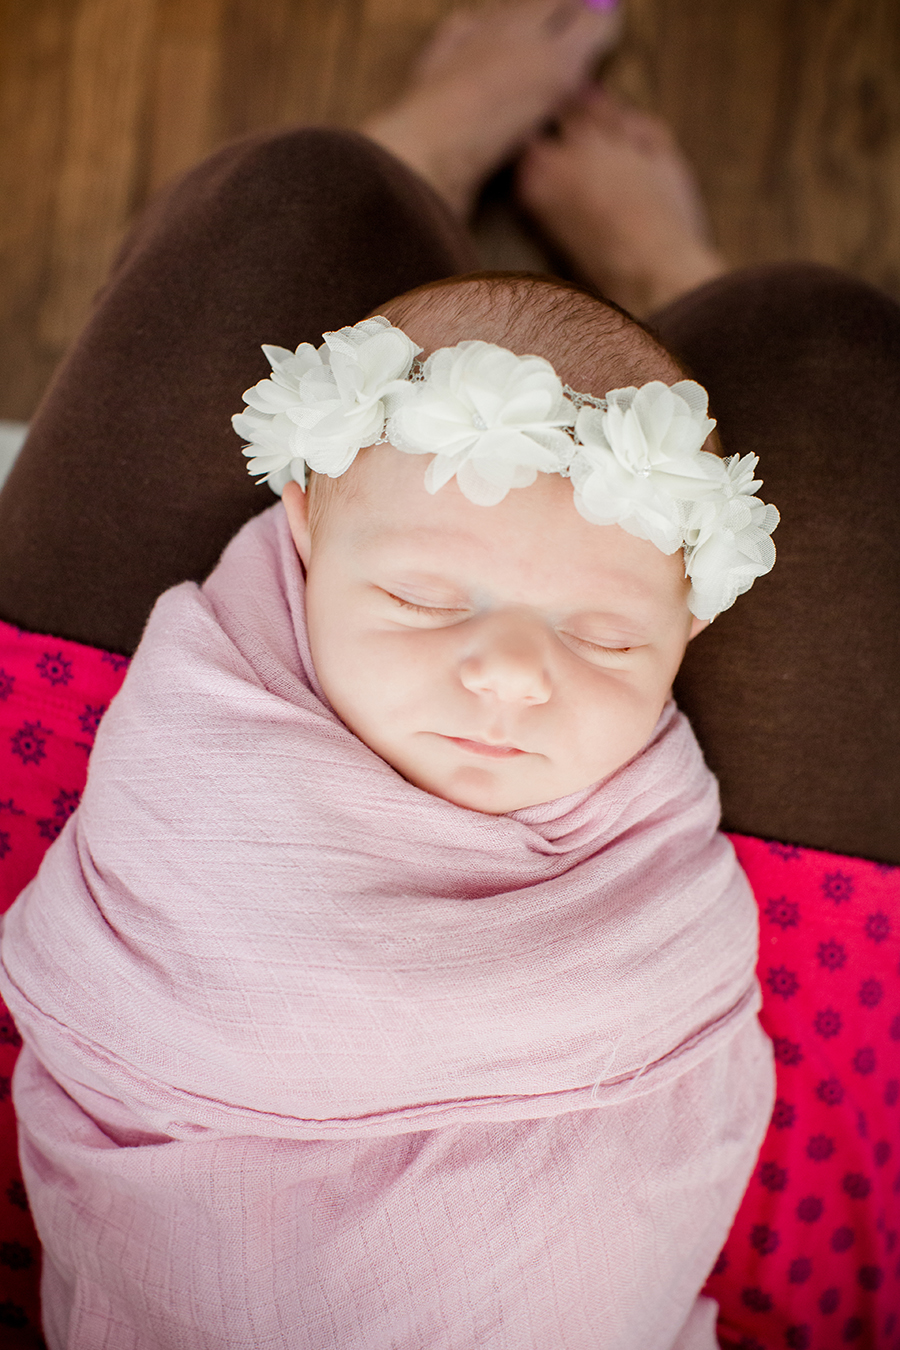 Swaddled with white flower crown by Knoxville Wedding Photographer, Amanda May Photos.